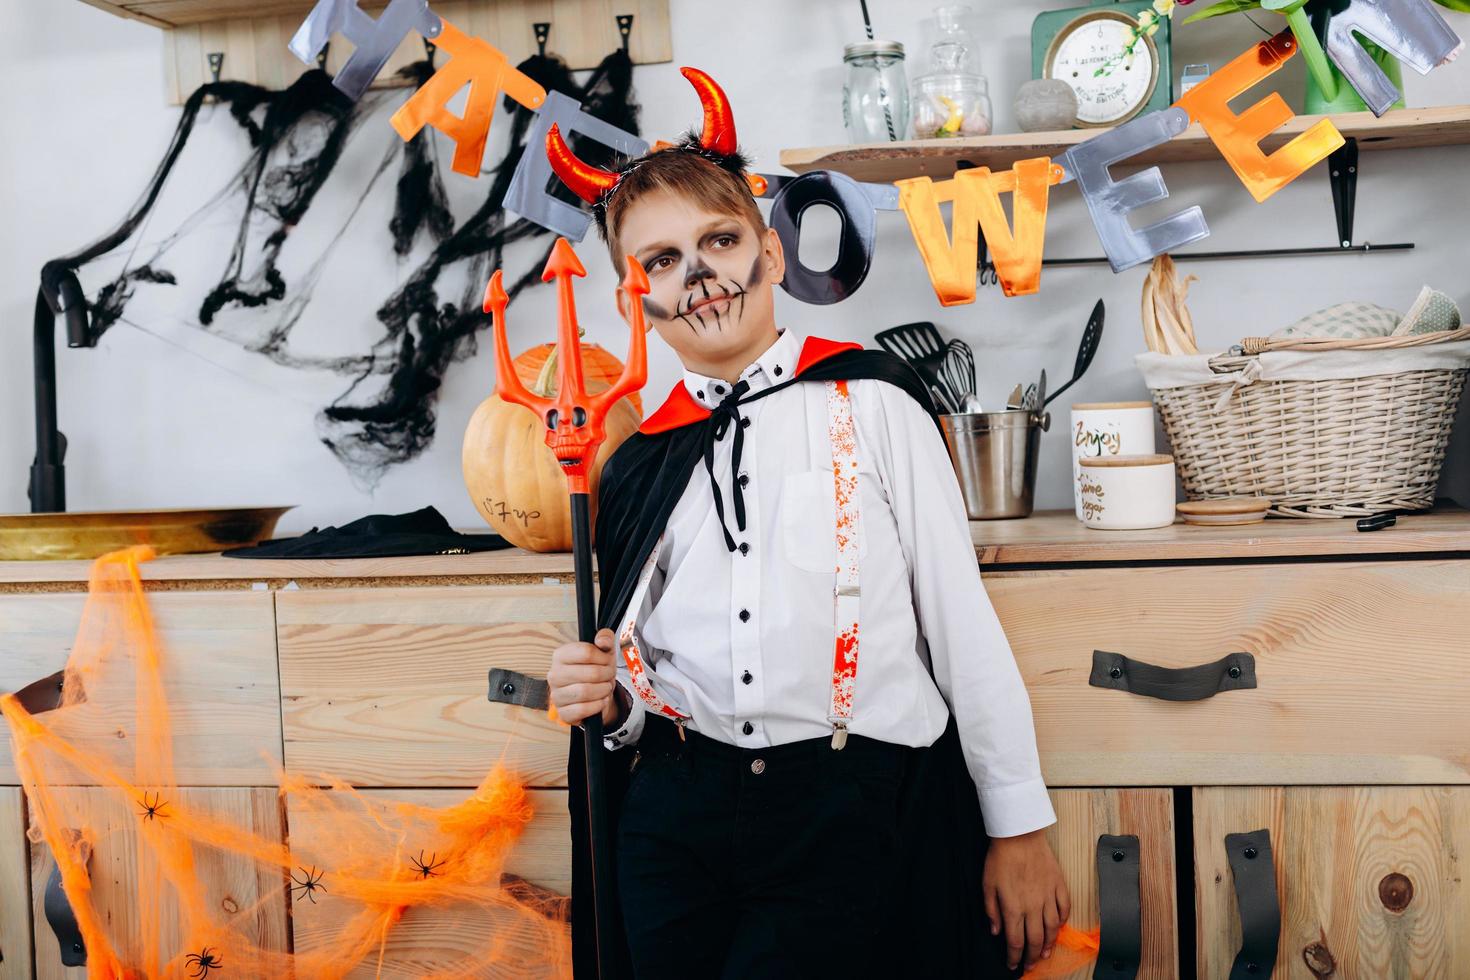 Boy standing  in fancy dress and looking out dreamly - Halloween concept photo